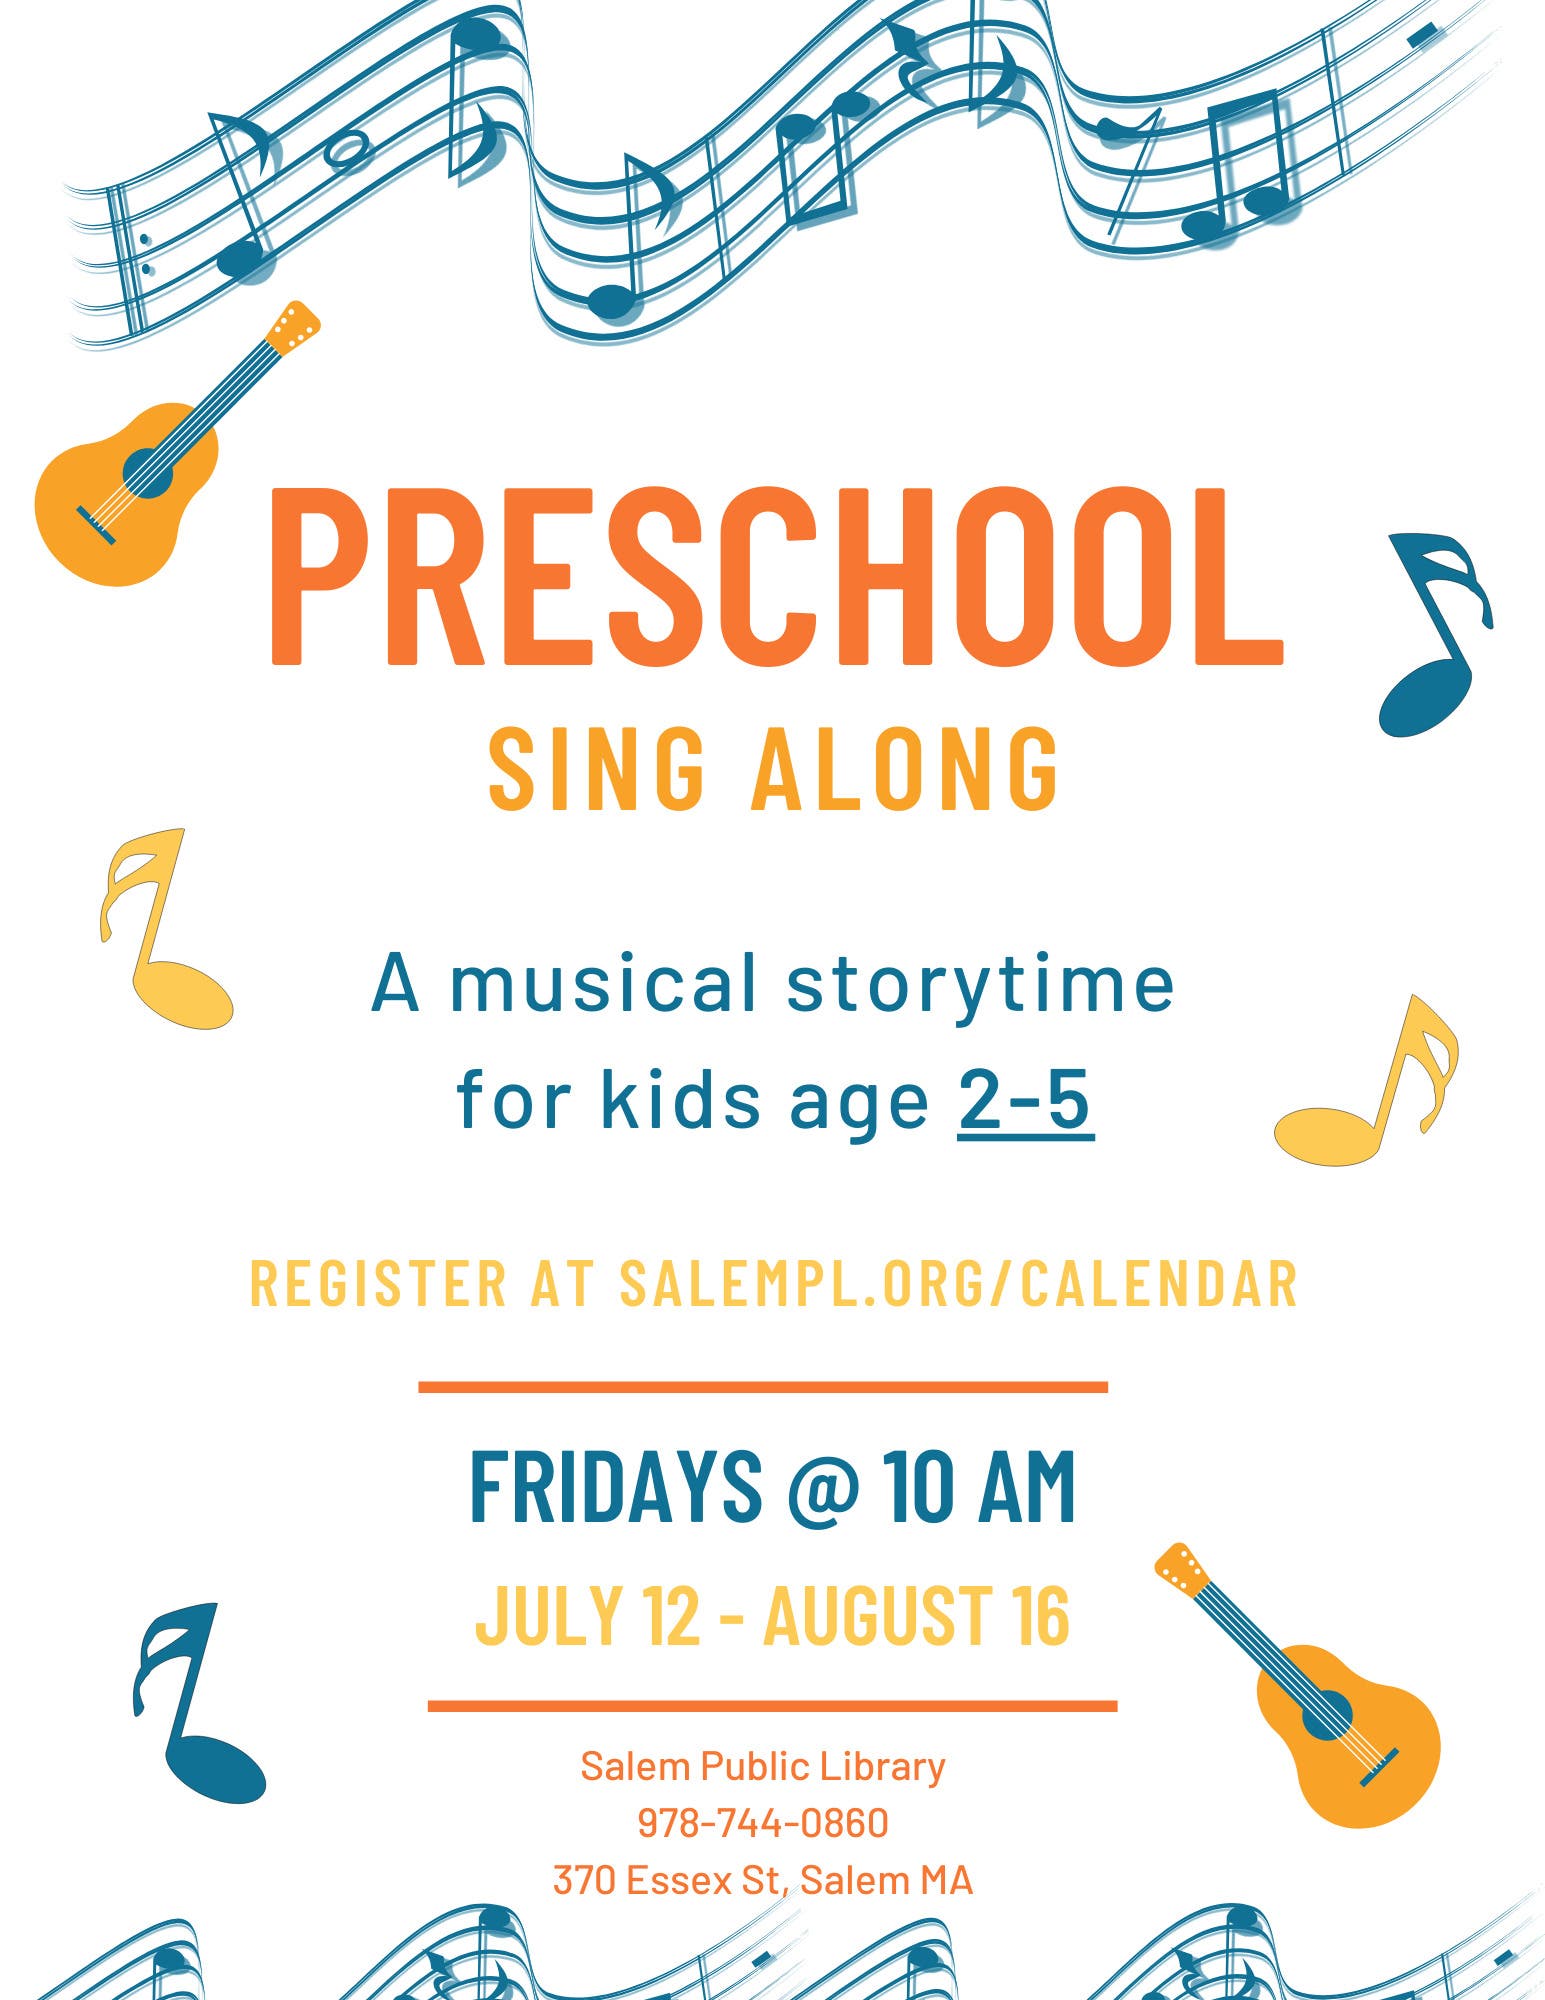 Preschool Sing Along for ages 2-5